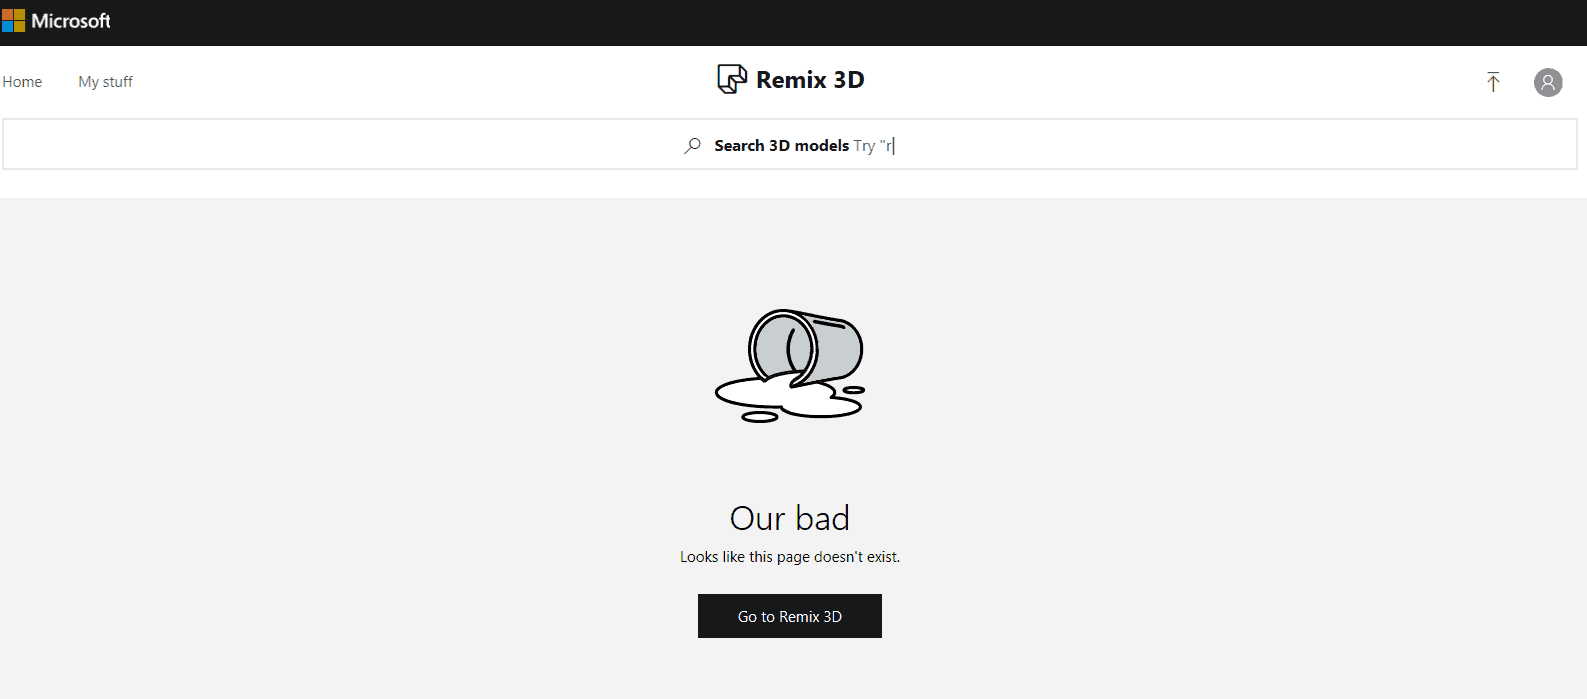 Remix 3D is being blocked by ad-blocking extensions - OnMSFT.com - August 20, 2018